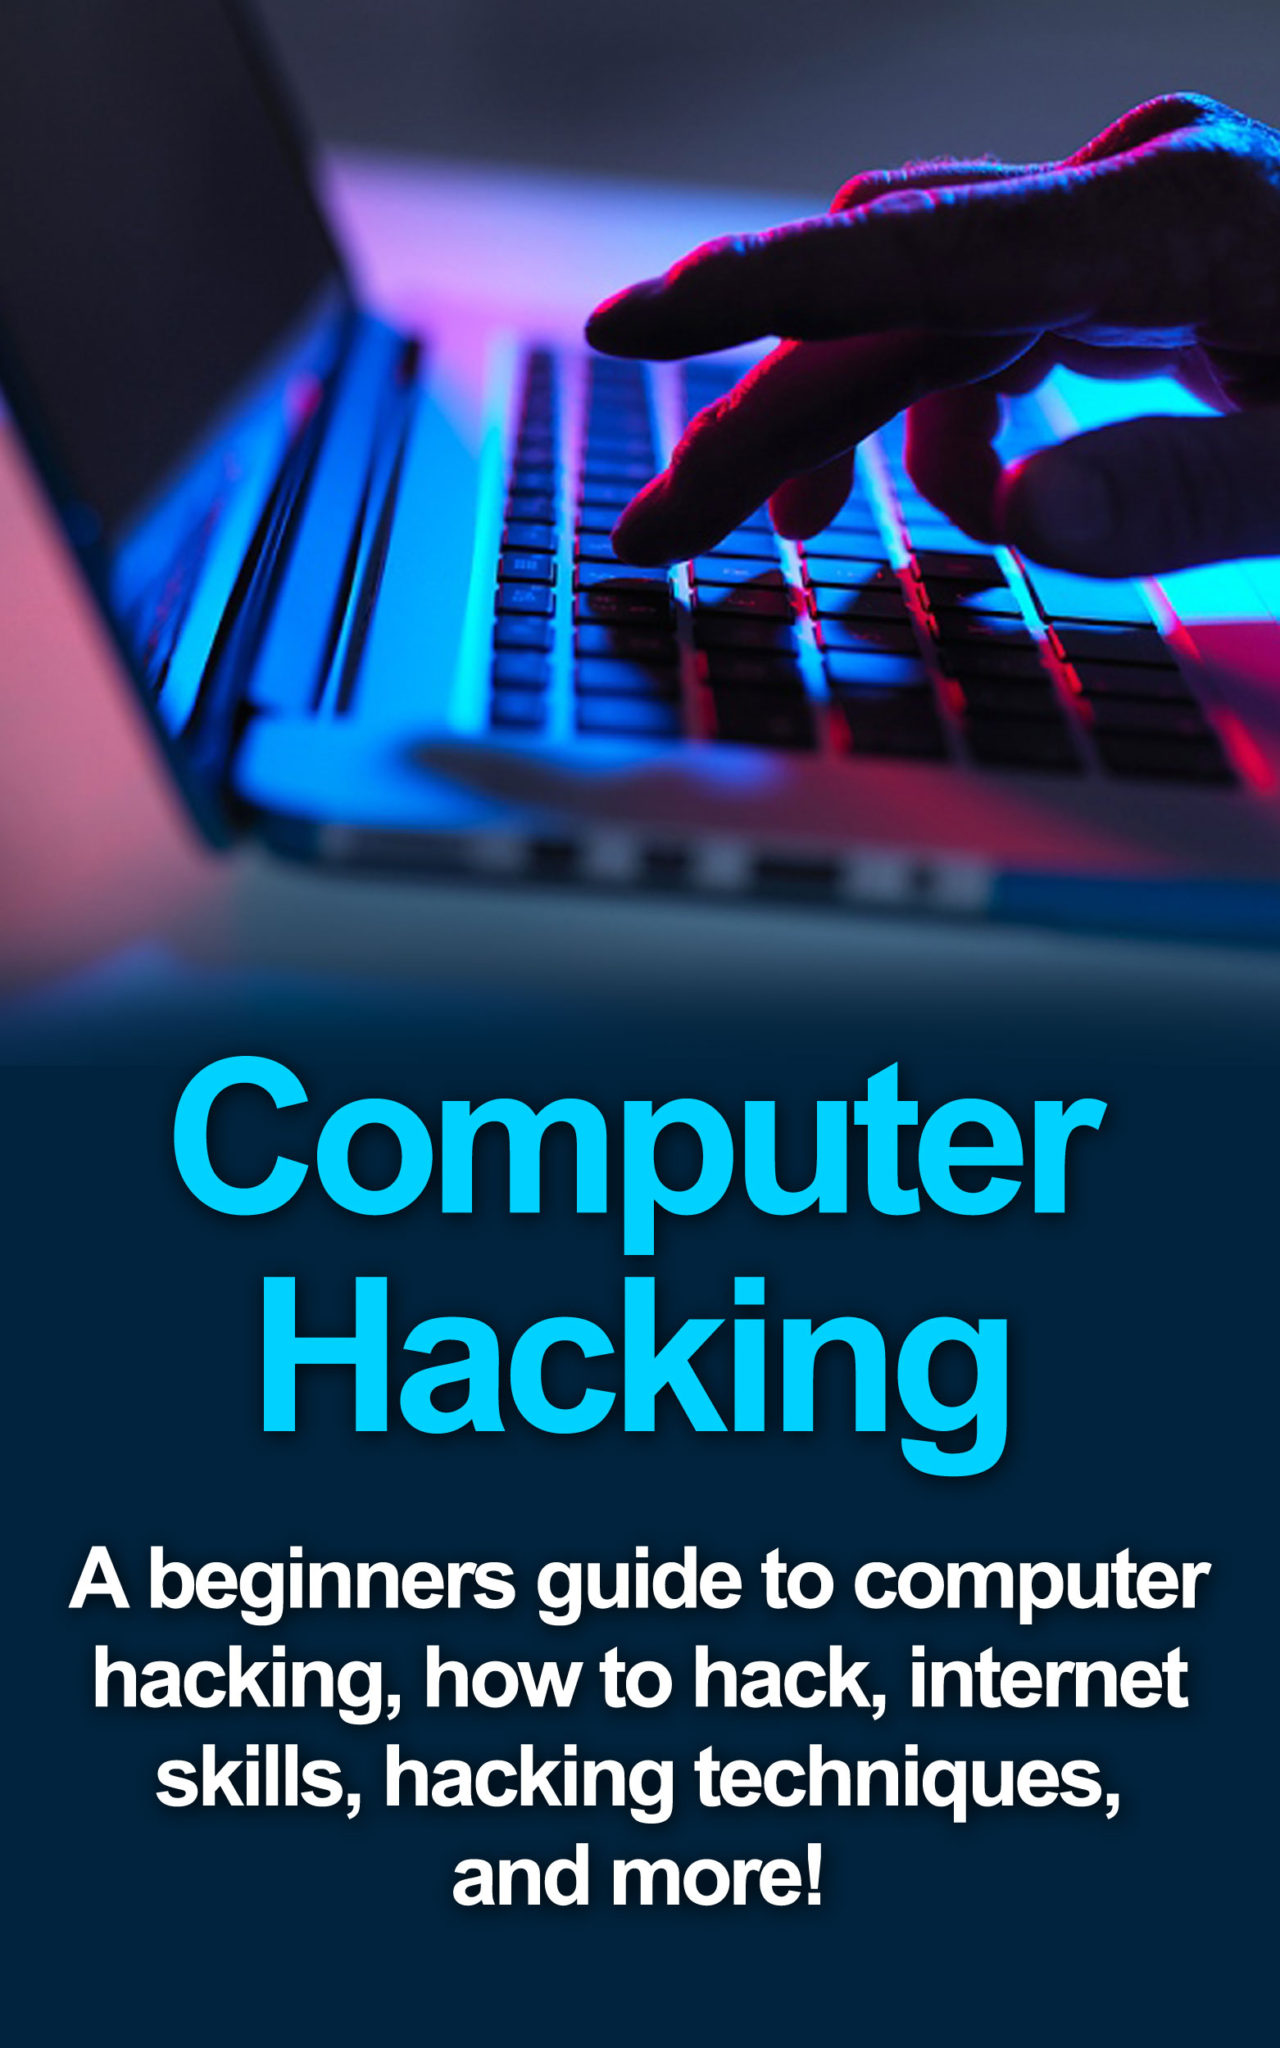 FREE: Computer Hacking: A beginners guide to computer hacking, how to hack, internet skills, hacking techniques, and more! by Joe Benton